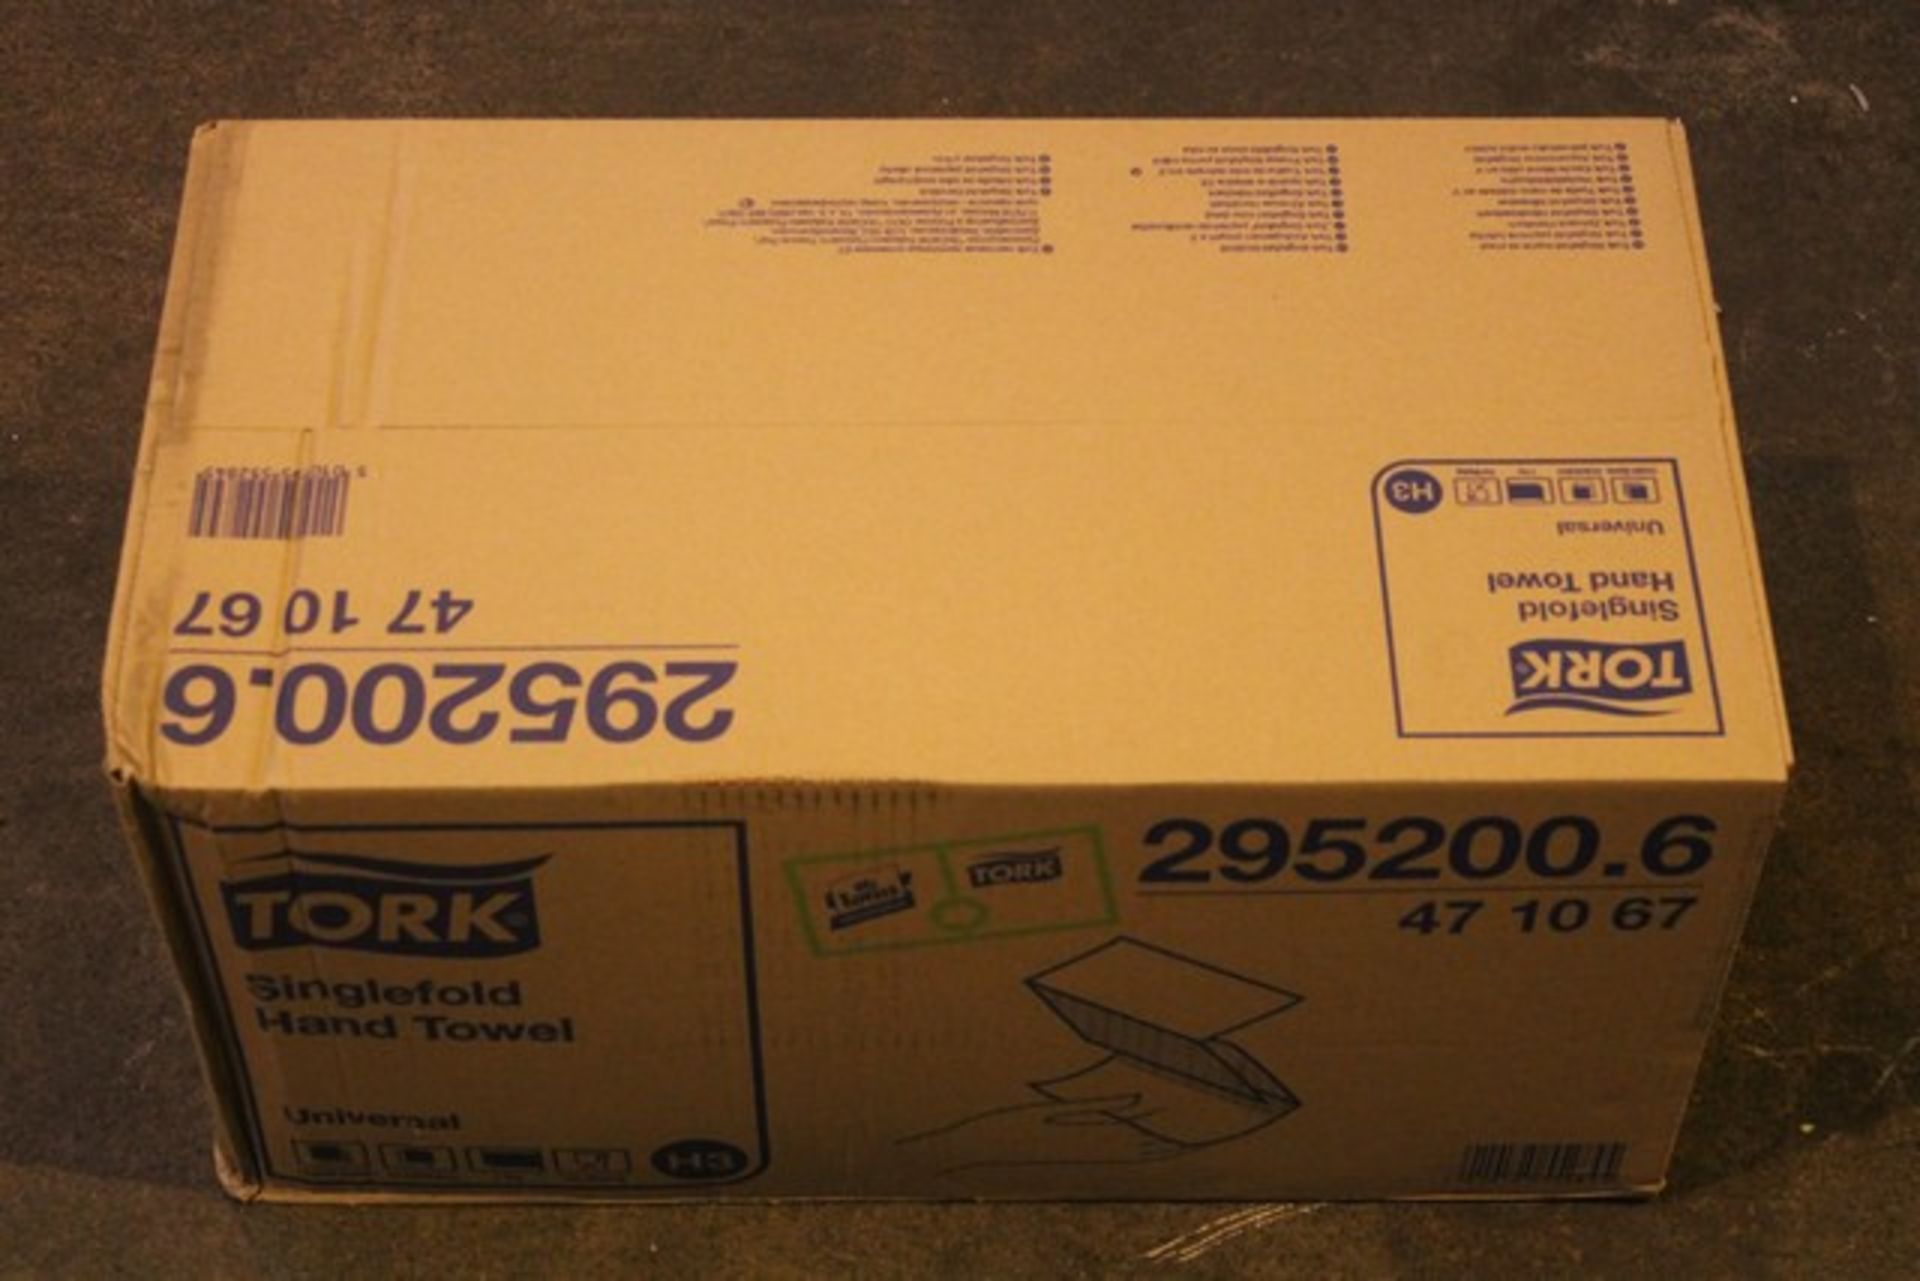 1 x BOX CONTAINING 16 PACKS OF TORK SINGLE FOLD HAND TOWELS   *PLEASE NOTE THAT THE BID PRICE IS